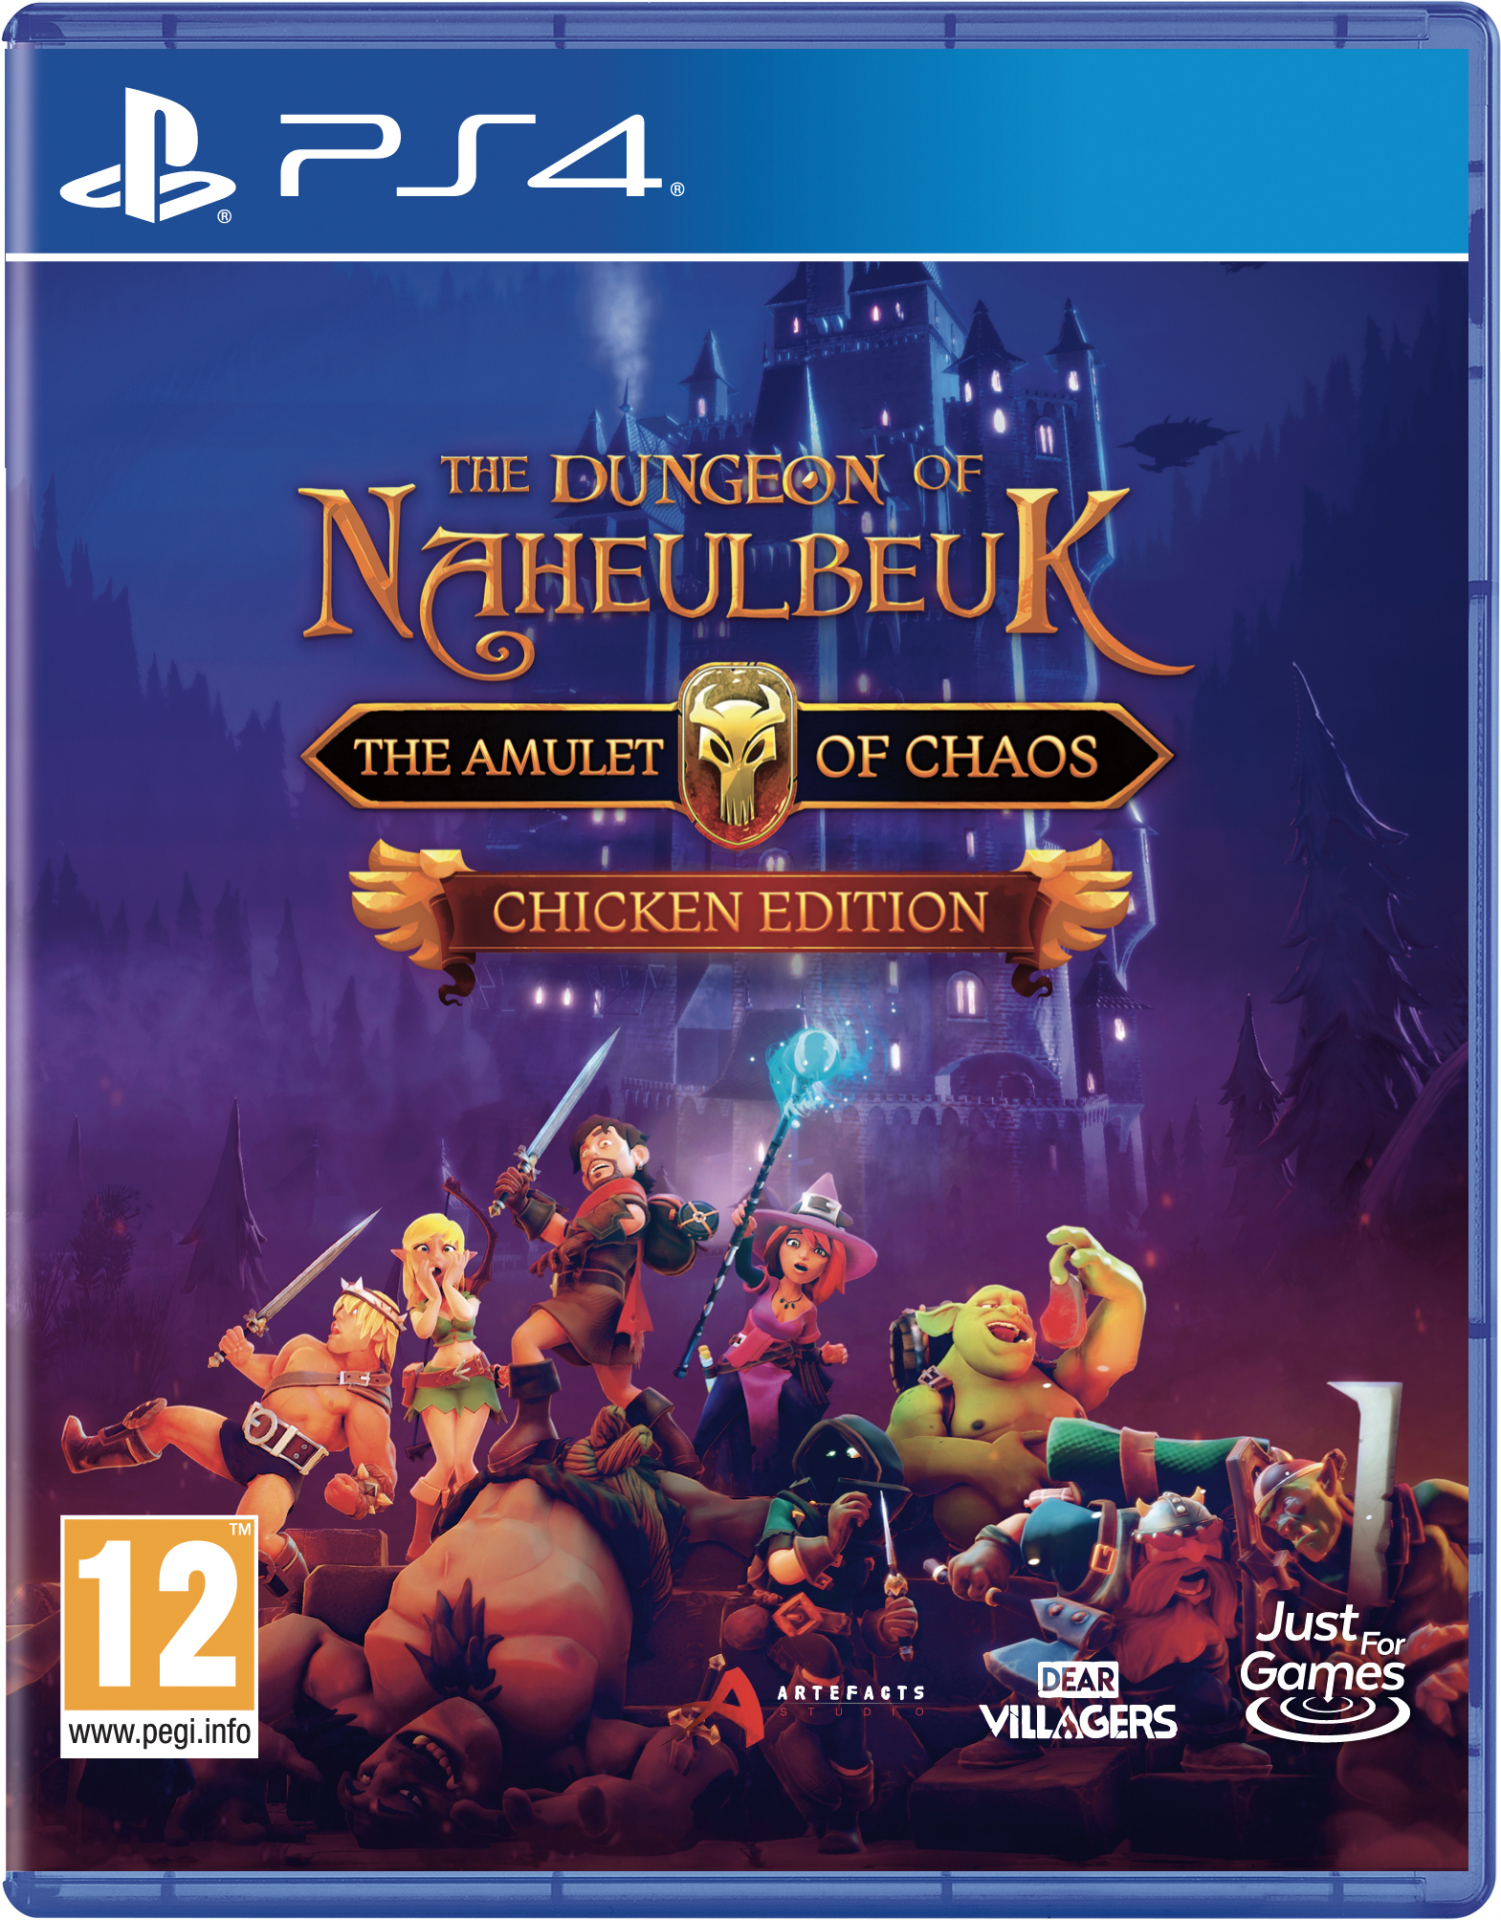 The Dungeon Of Naheulbeuk: The Amulet Of Chaos - Chicken Edition (PS4), Just for Games